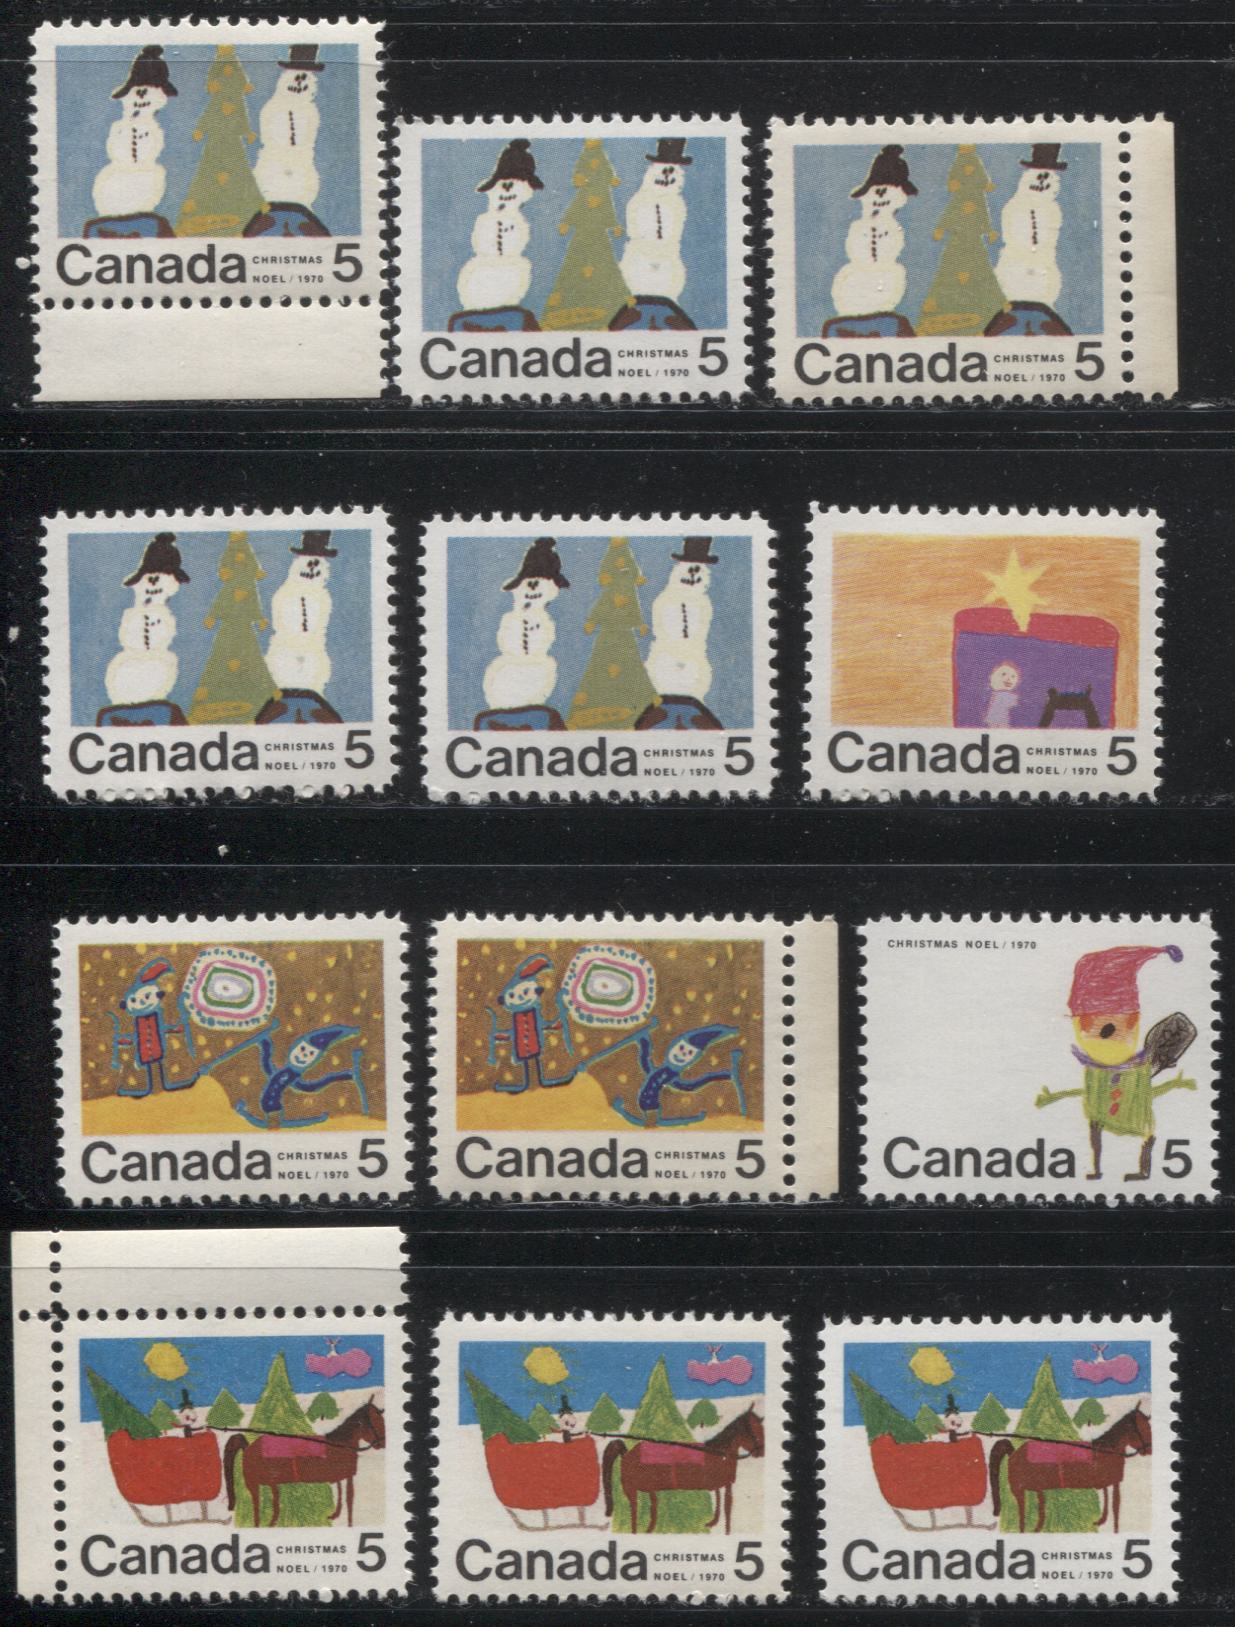 Lot 138 Canada #519-523 5c Multicoloured 1970 Christmas Issue, A Complete Set of 12 Constant Plate Varieties From Combination 5, Smooth HB12 Paper, Perf. 11.9